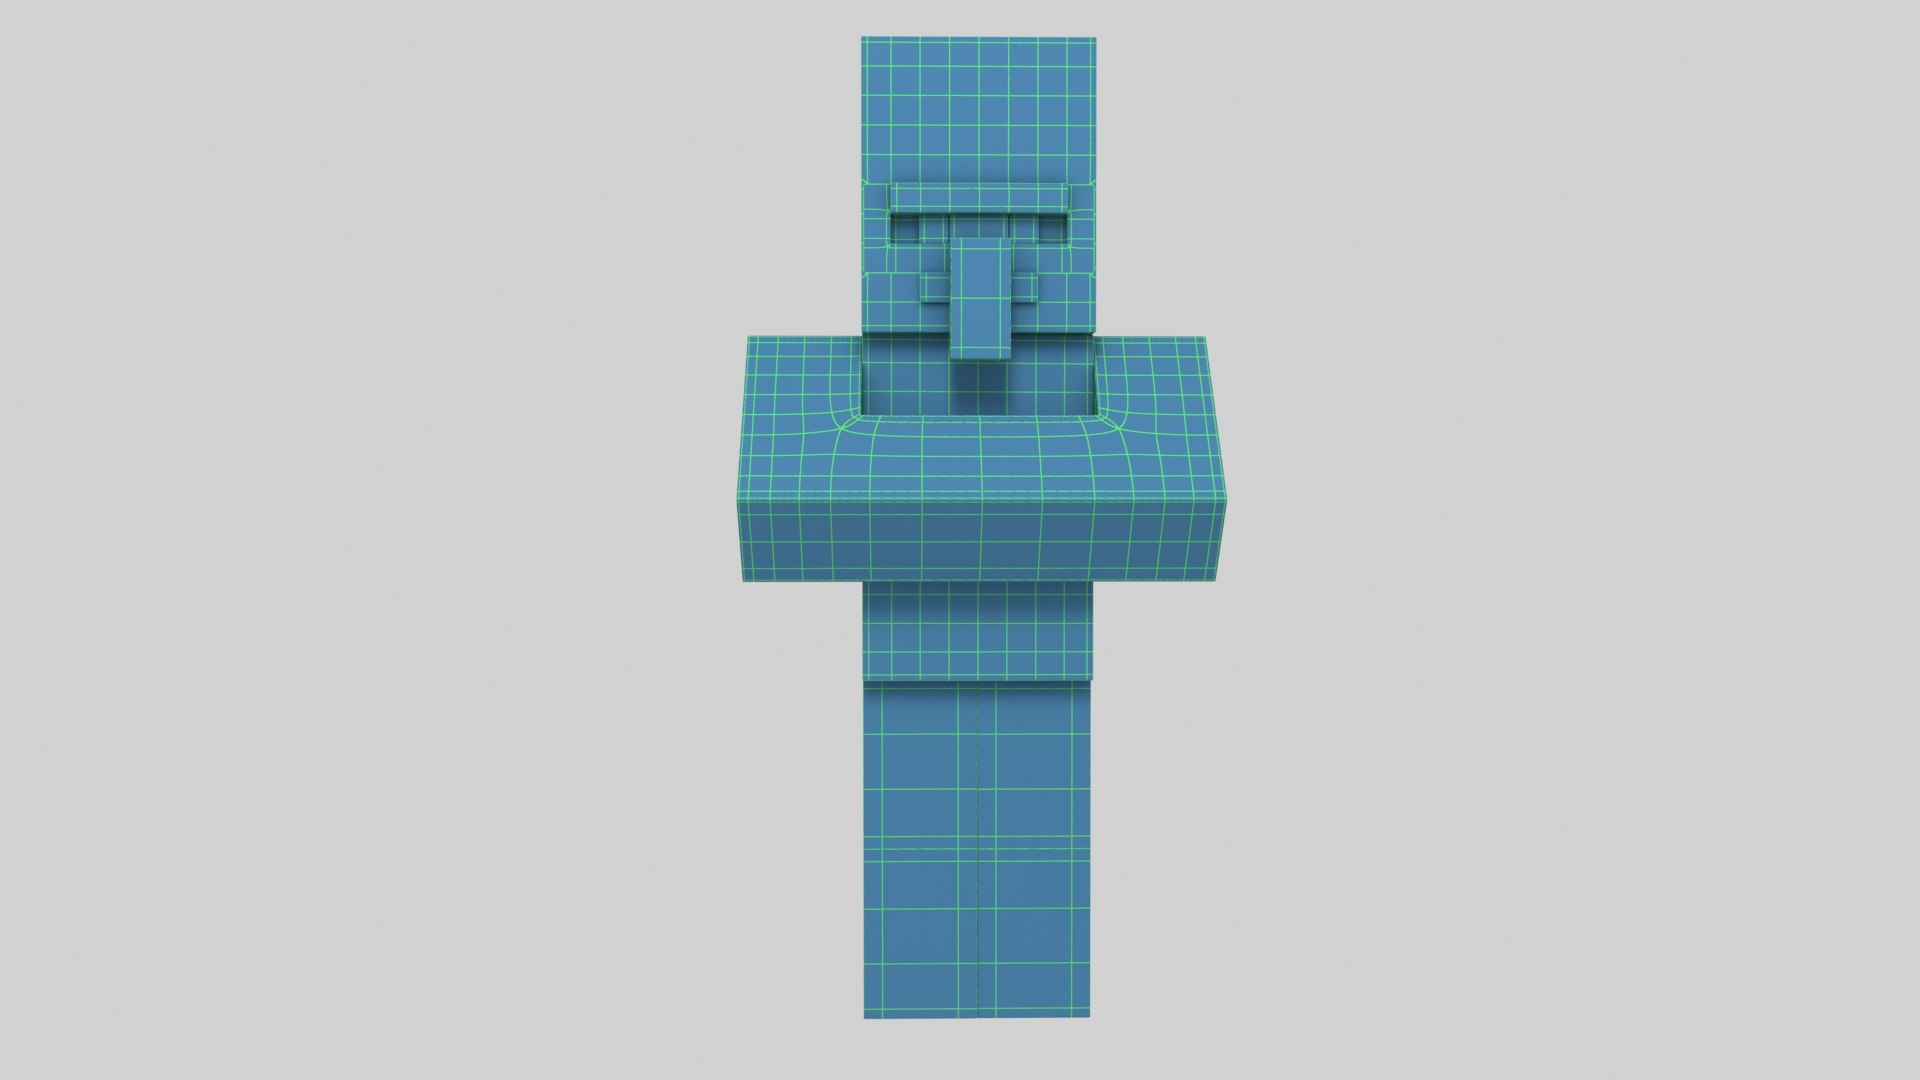 The armor silver minecraft character free 3D model rigged